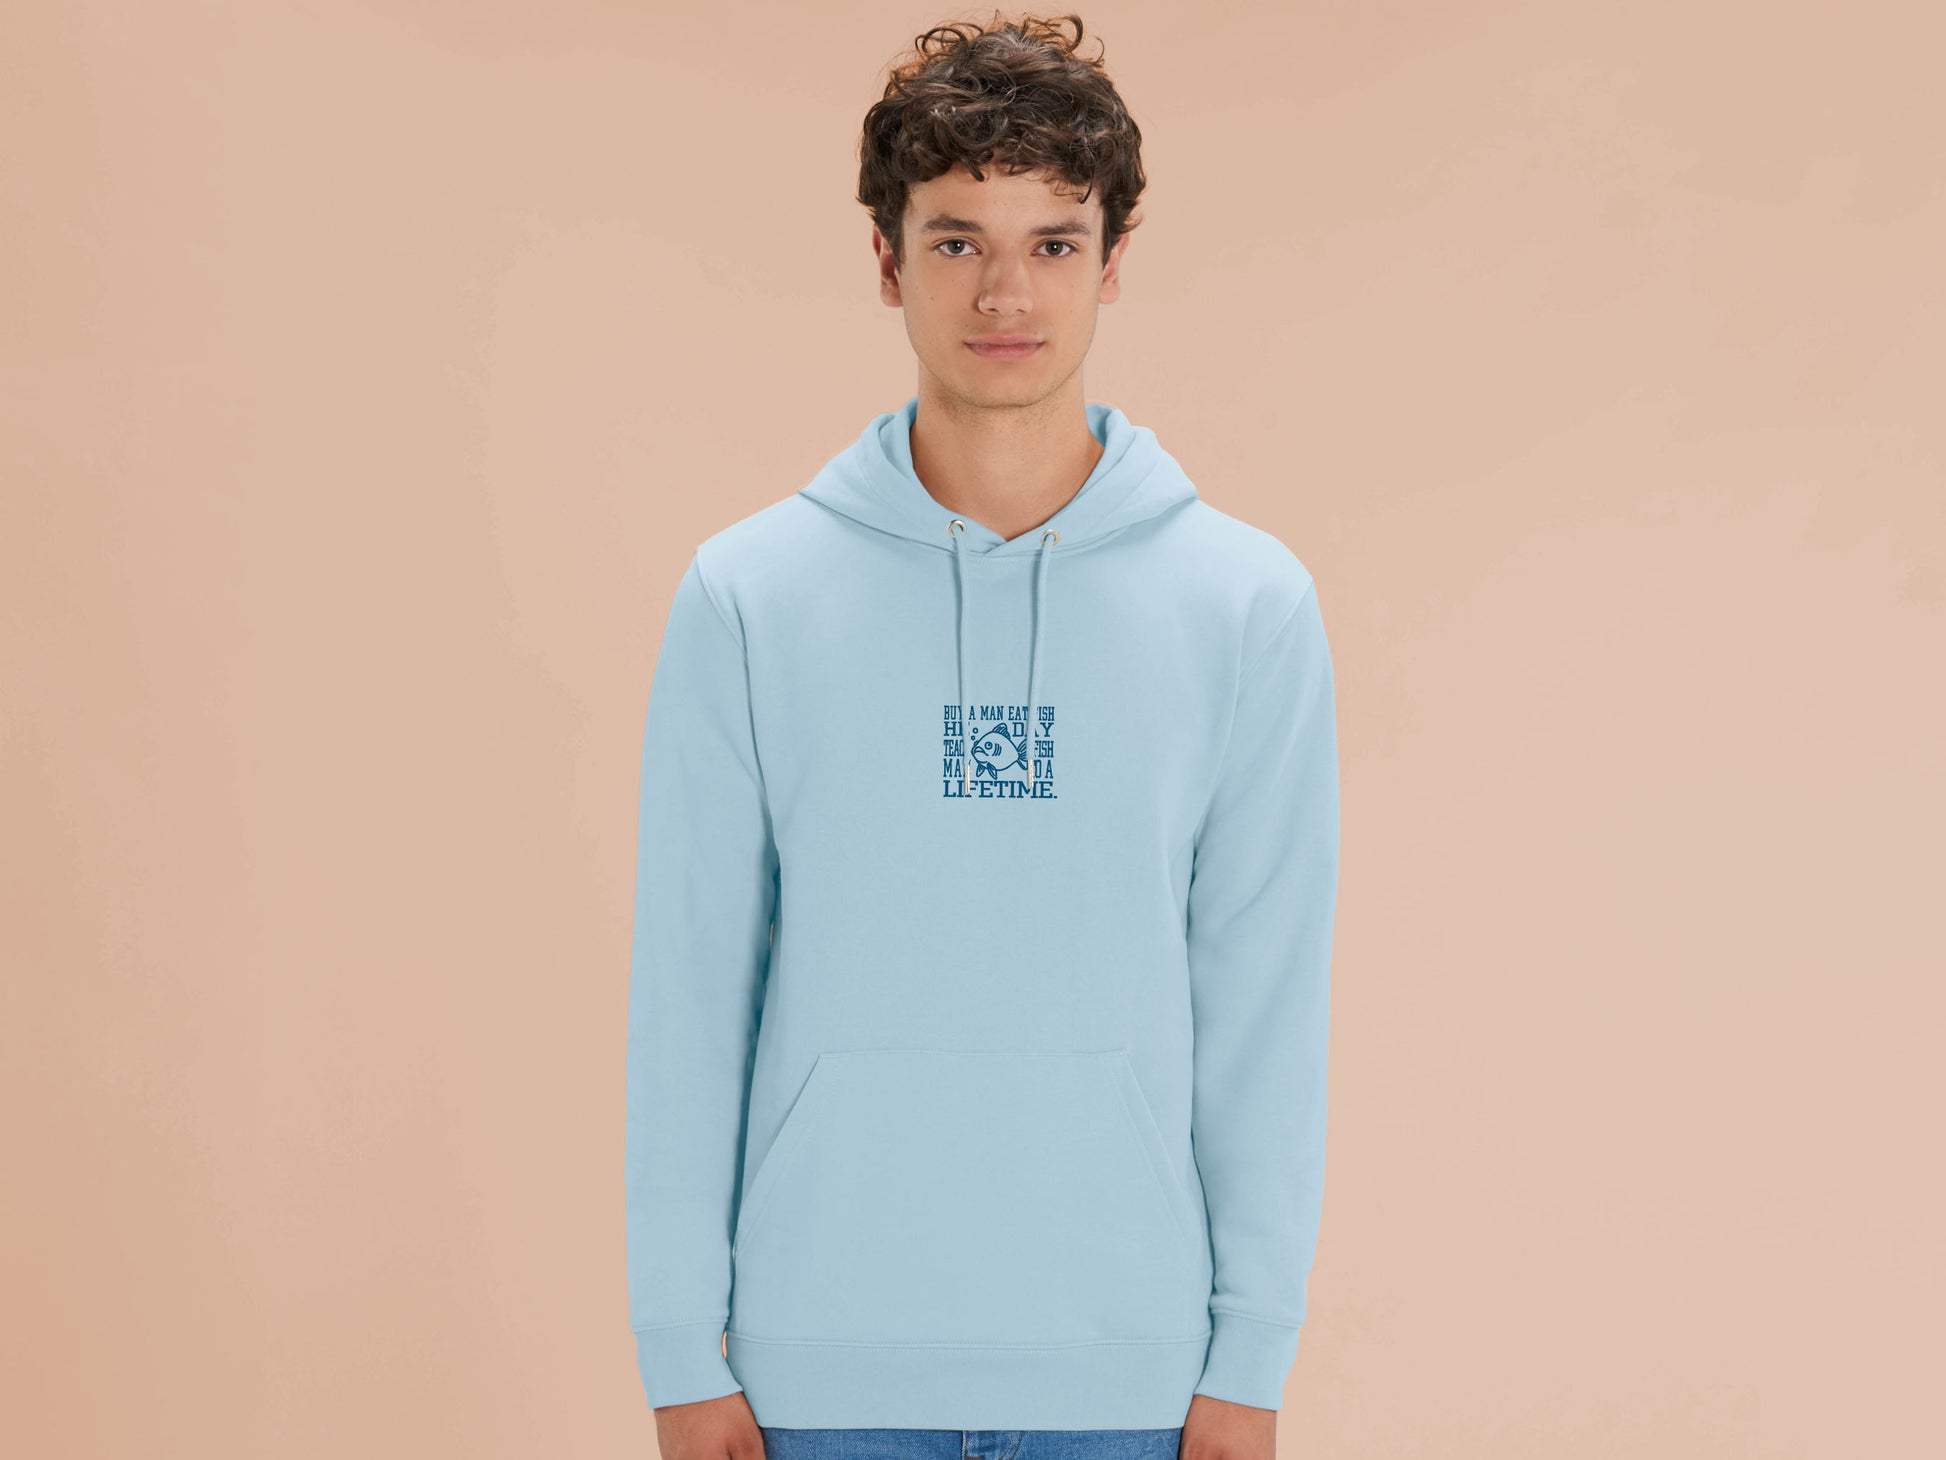 A man wearing a blue long sleeved fleece hoodie with an embroidered blue design of a cartoon funny fish with the meme text Buy a man eat a fish he day teach fish man to a lifetime.